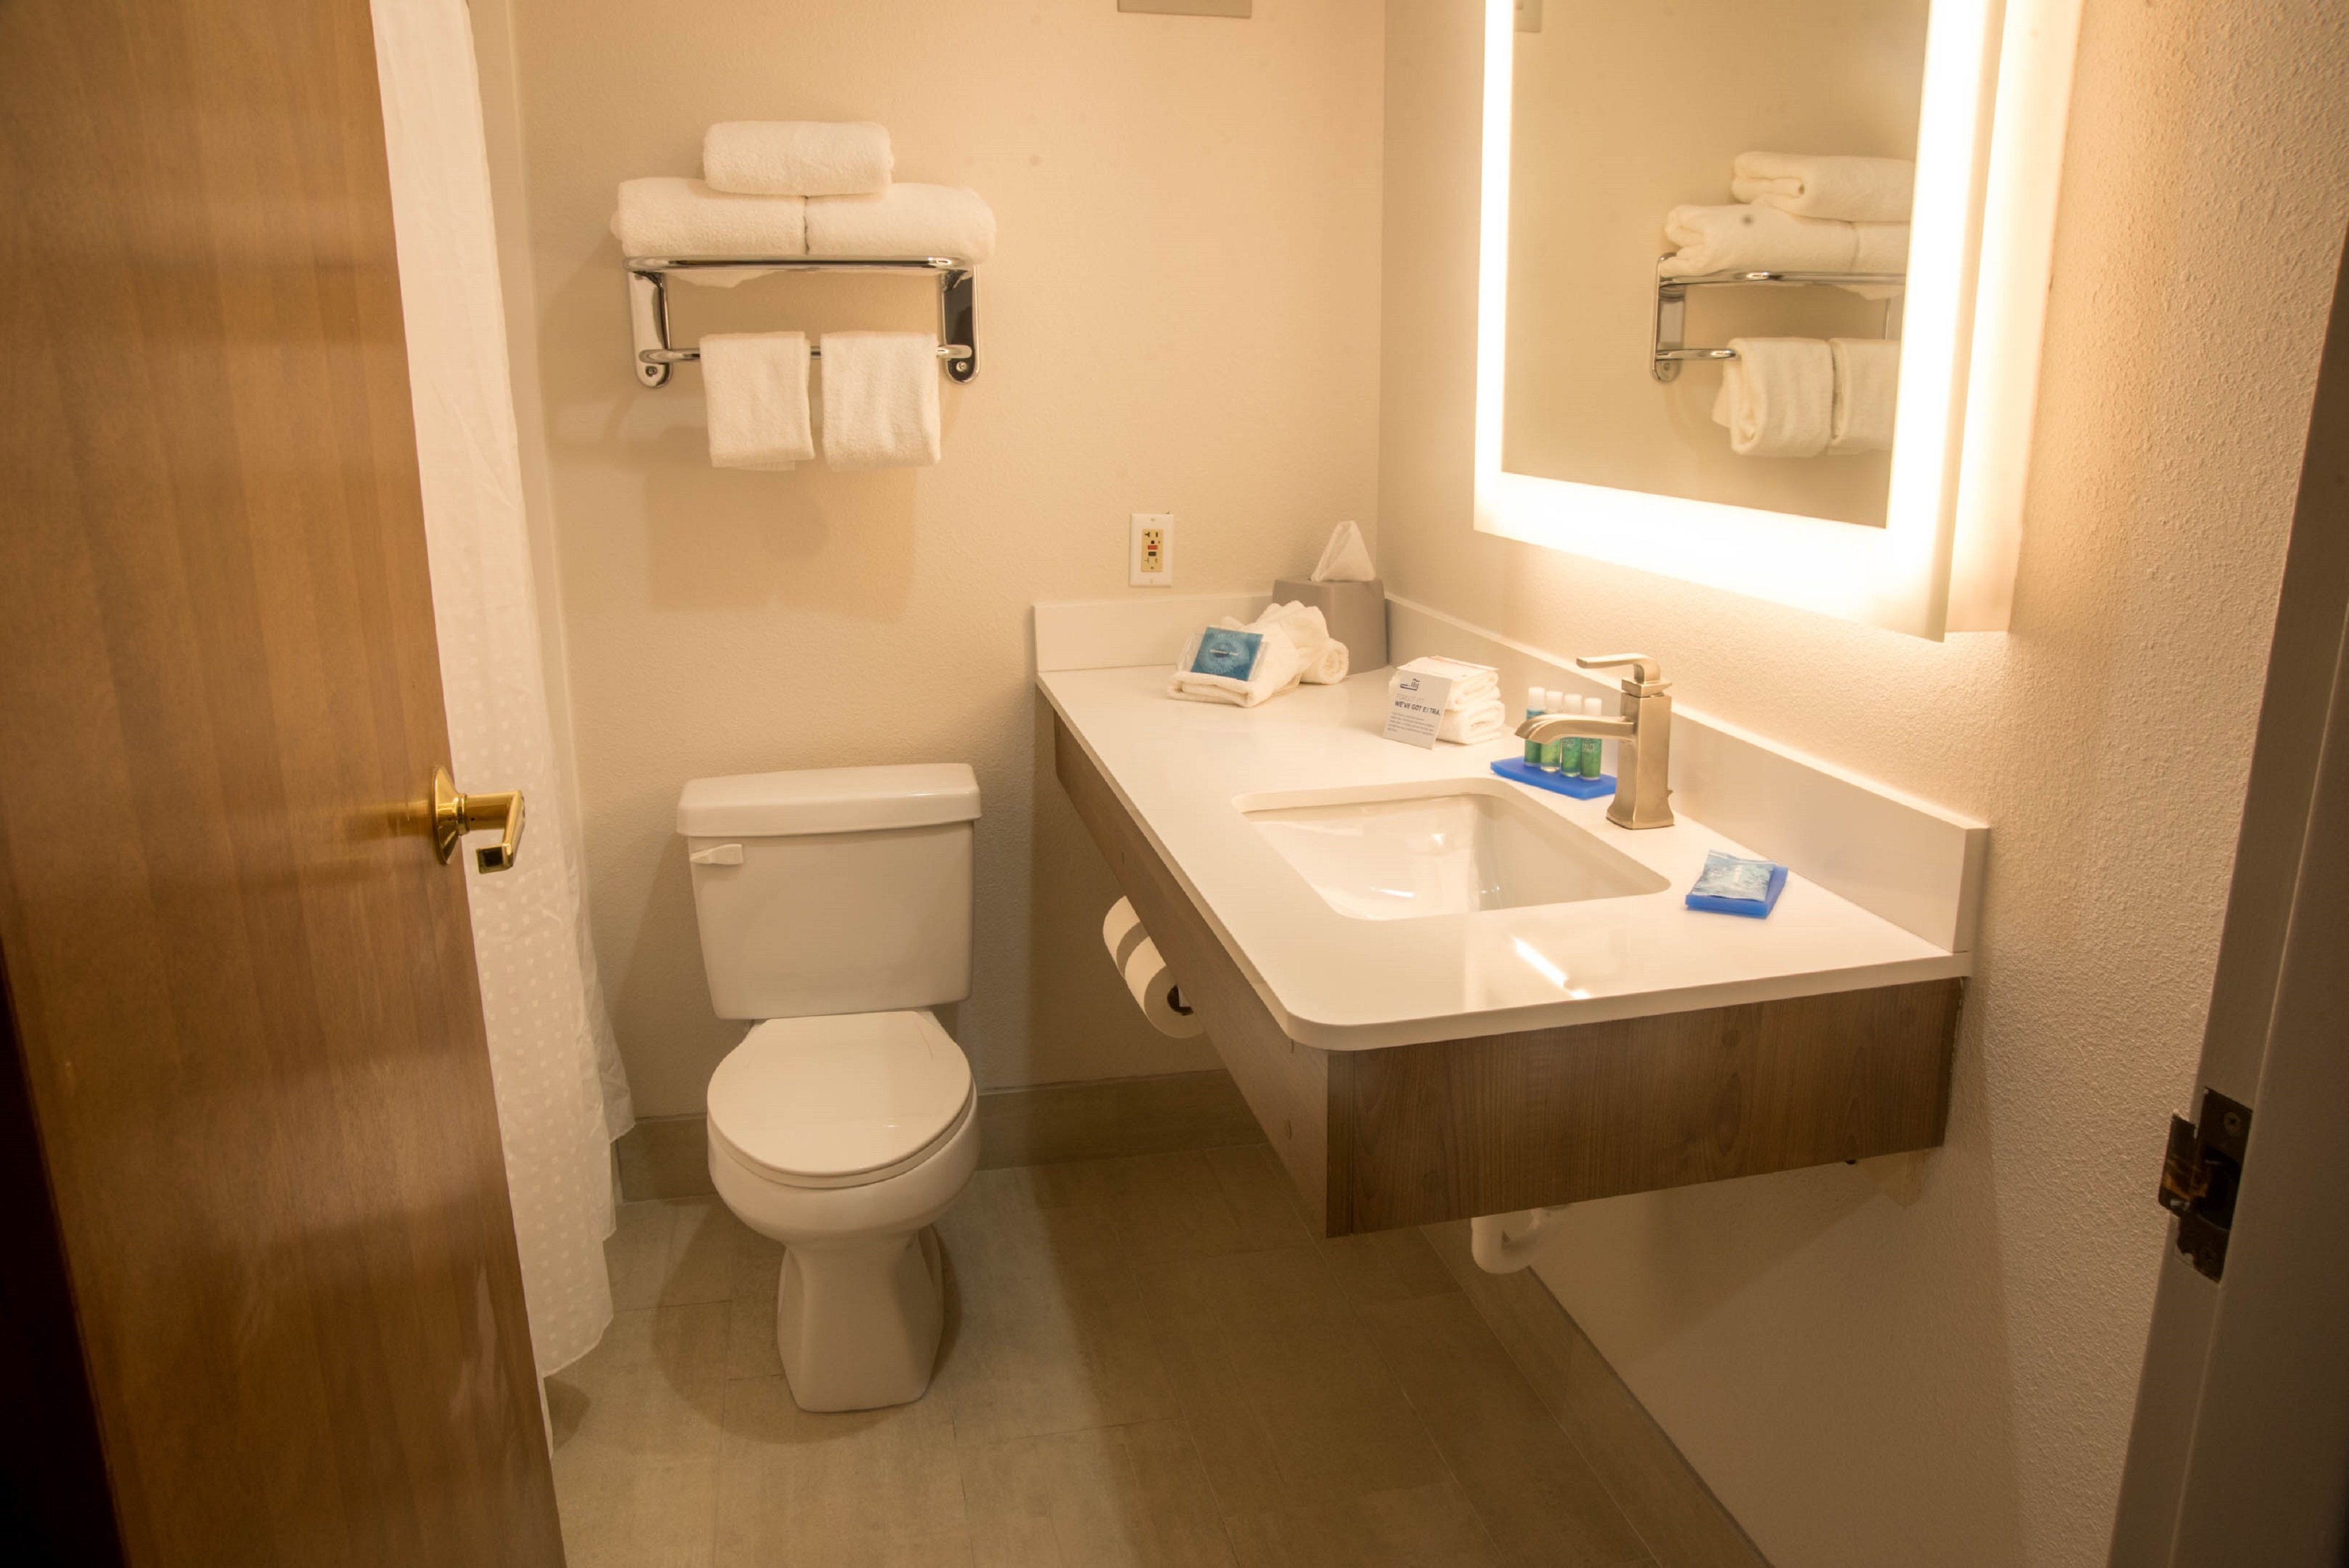 Our Refreshed & Renovated Guest Bathroom